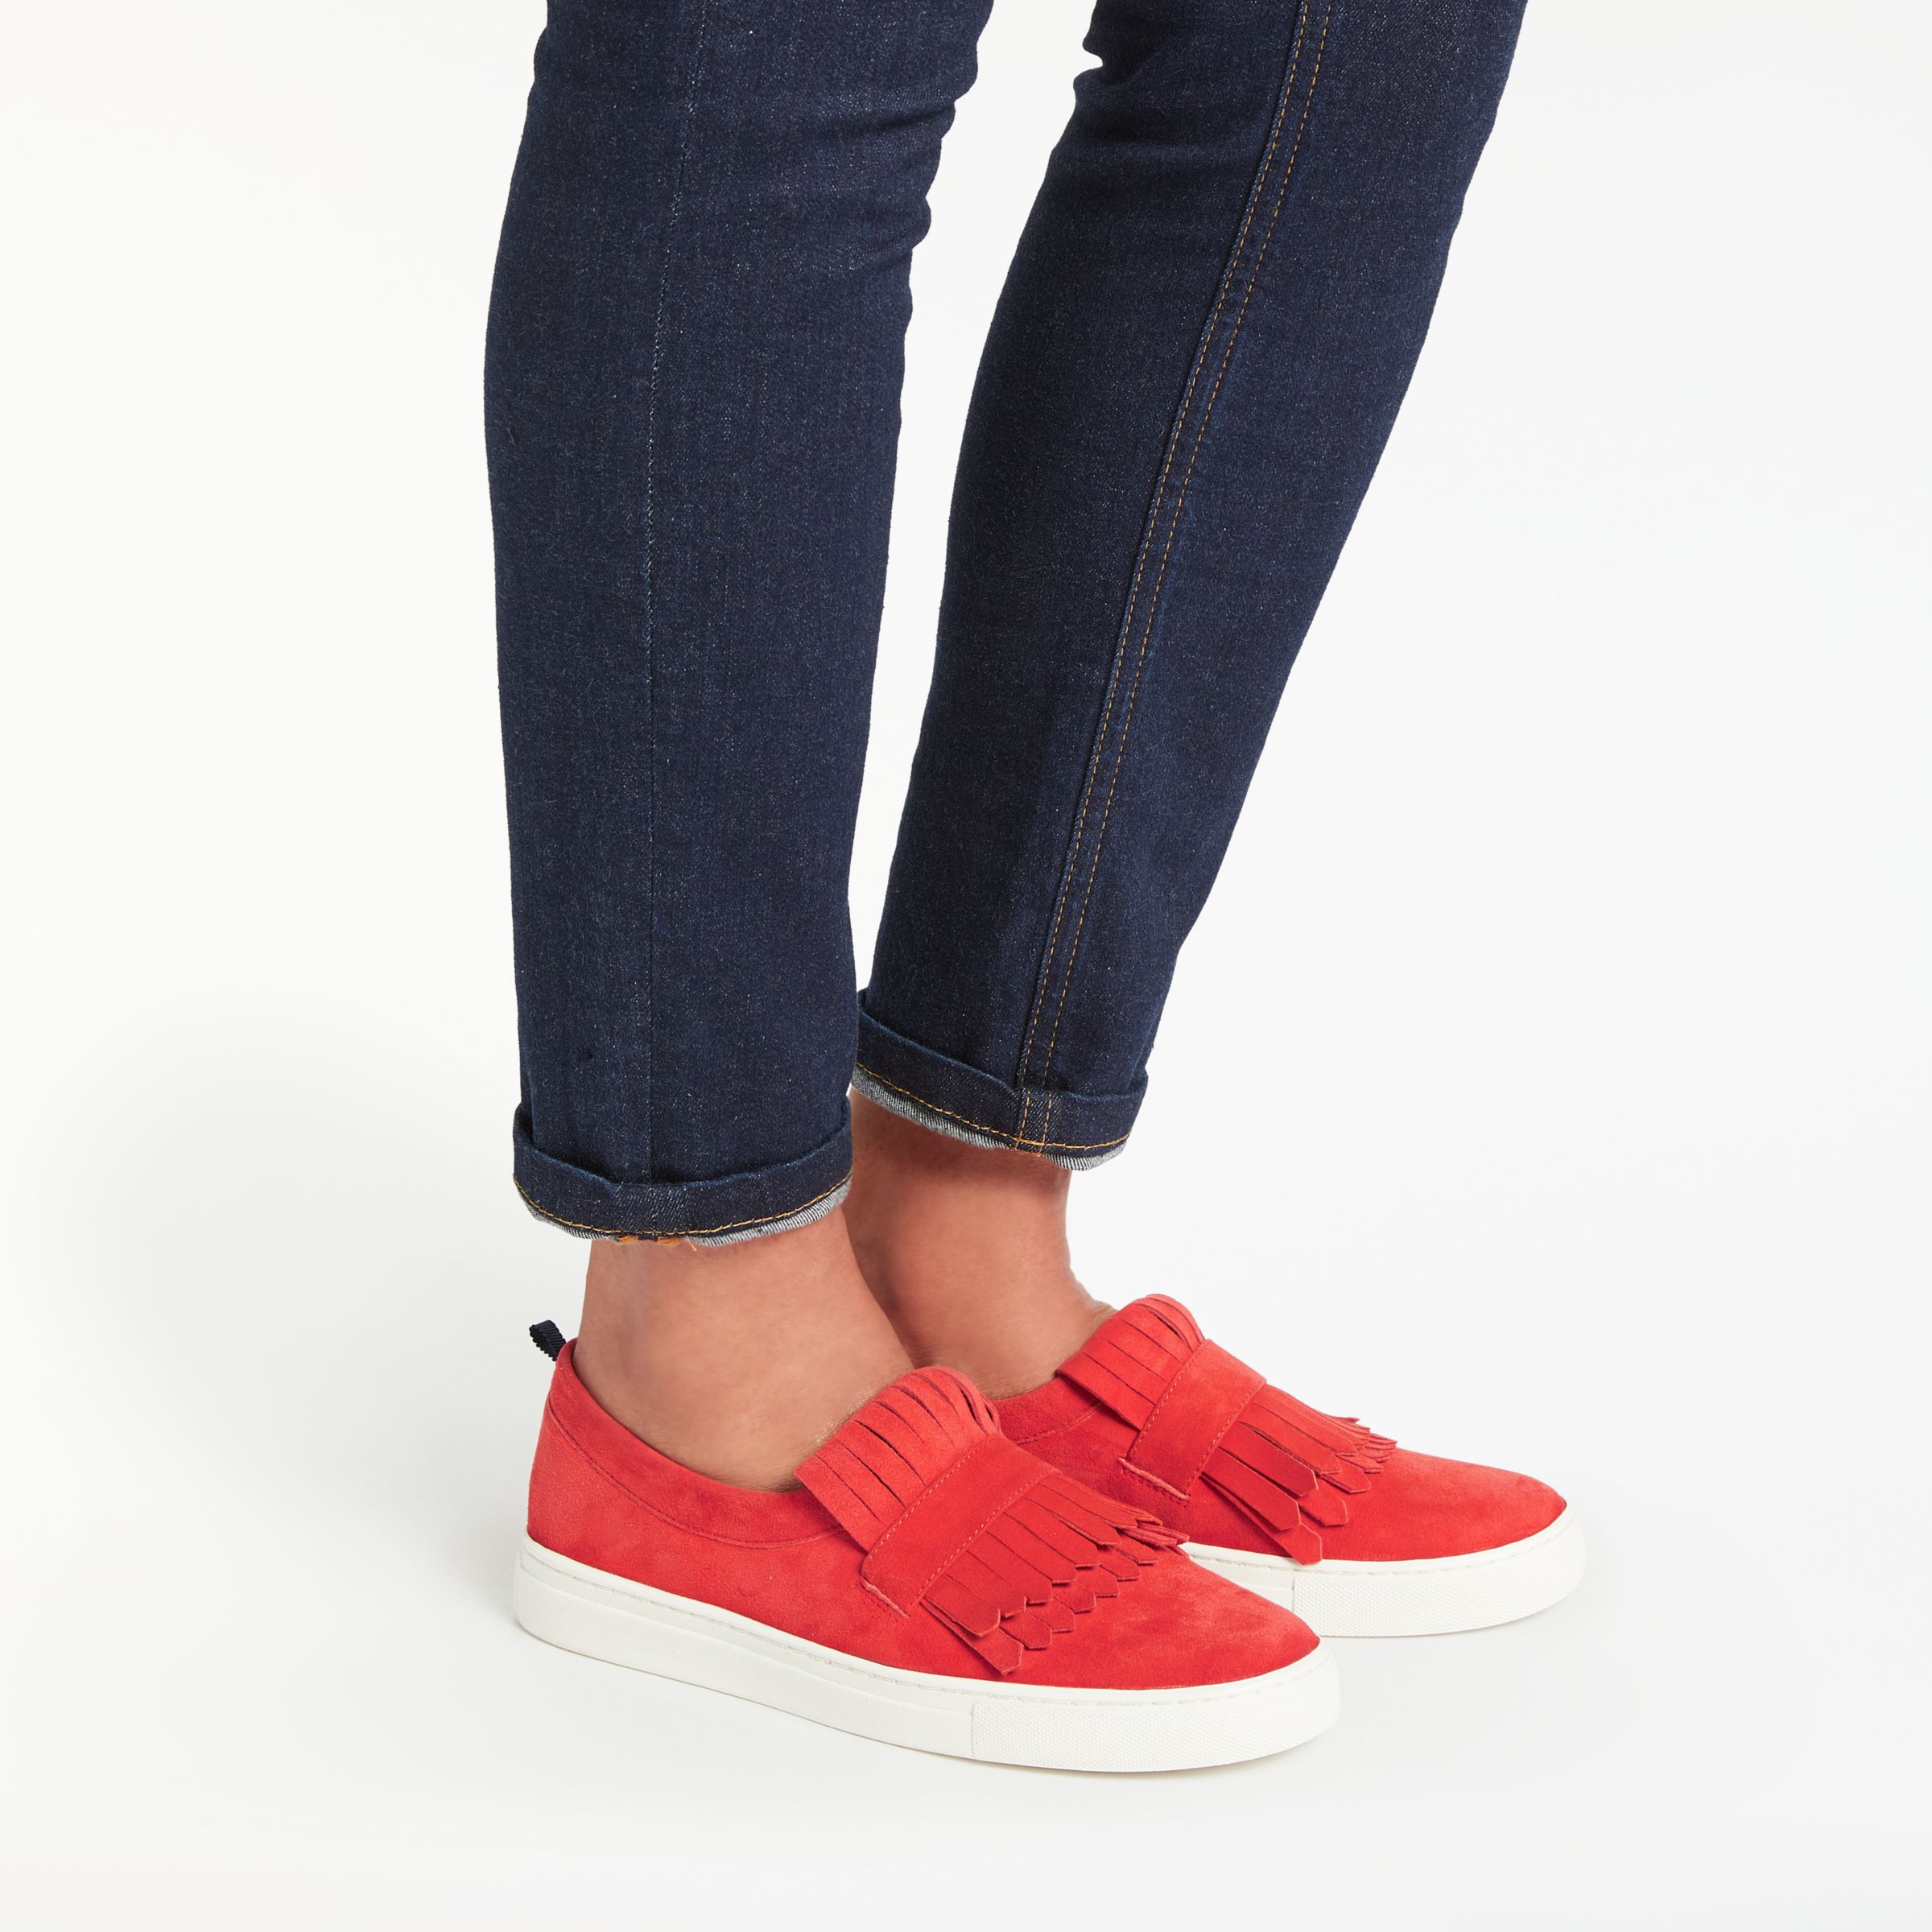 Boden Rayna Fringed Slip On Trainers, Red Pop Suede